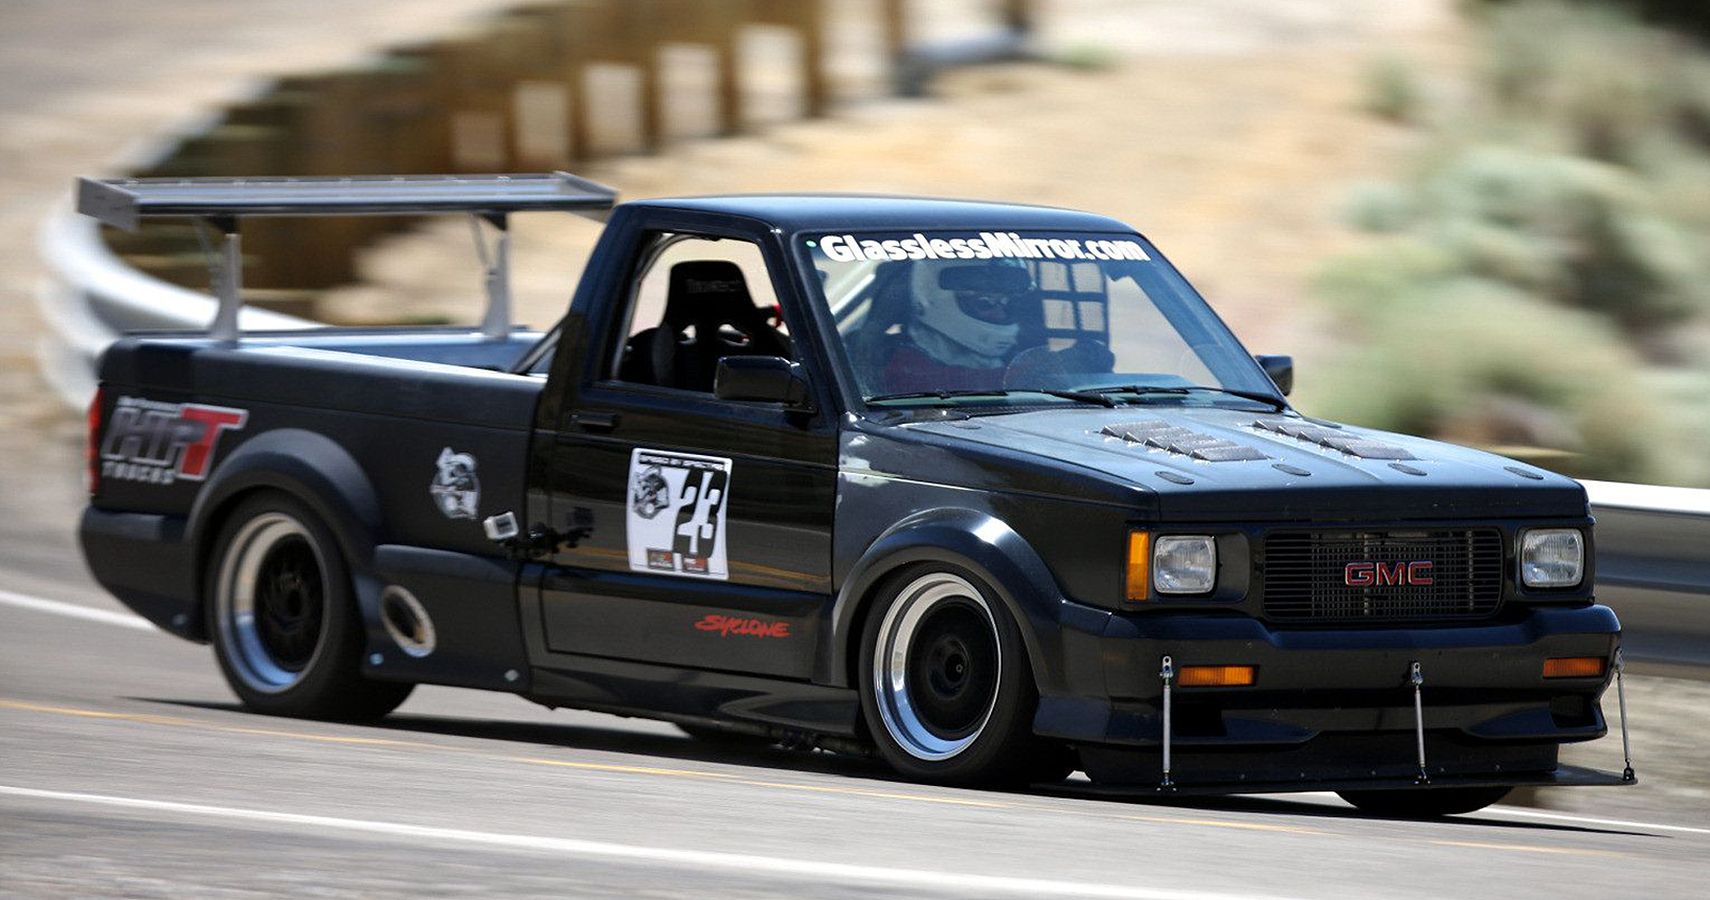 Often Dubbed As The “Worst Pickup Truck” Of Its Time, The Syclone Got This Moniker Because It Was More Track-Oriented Than An Actual Workhorse